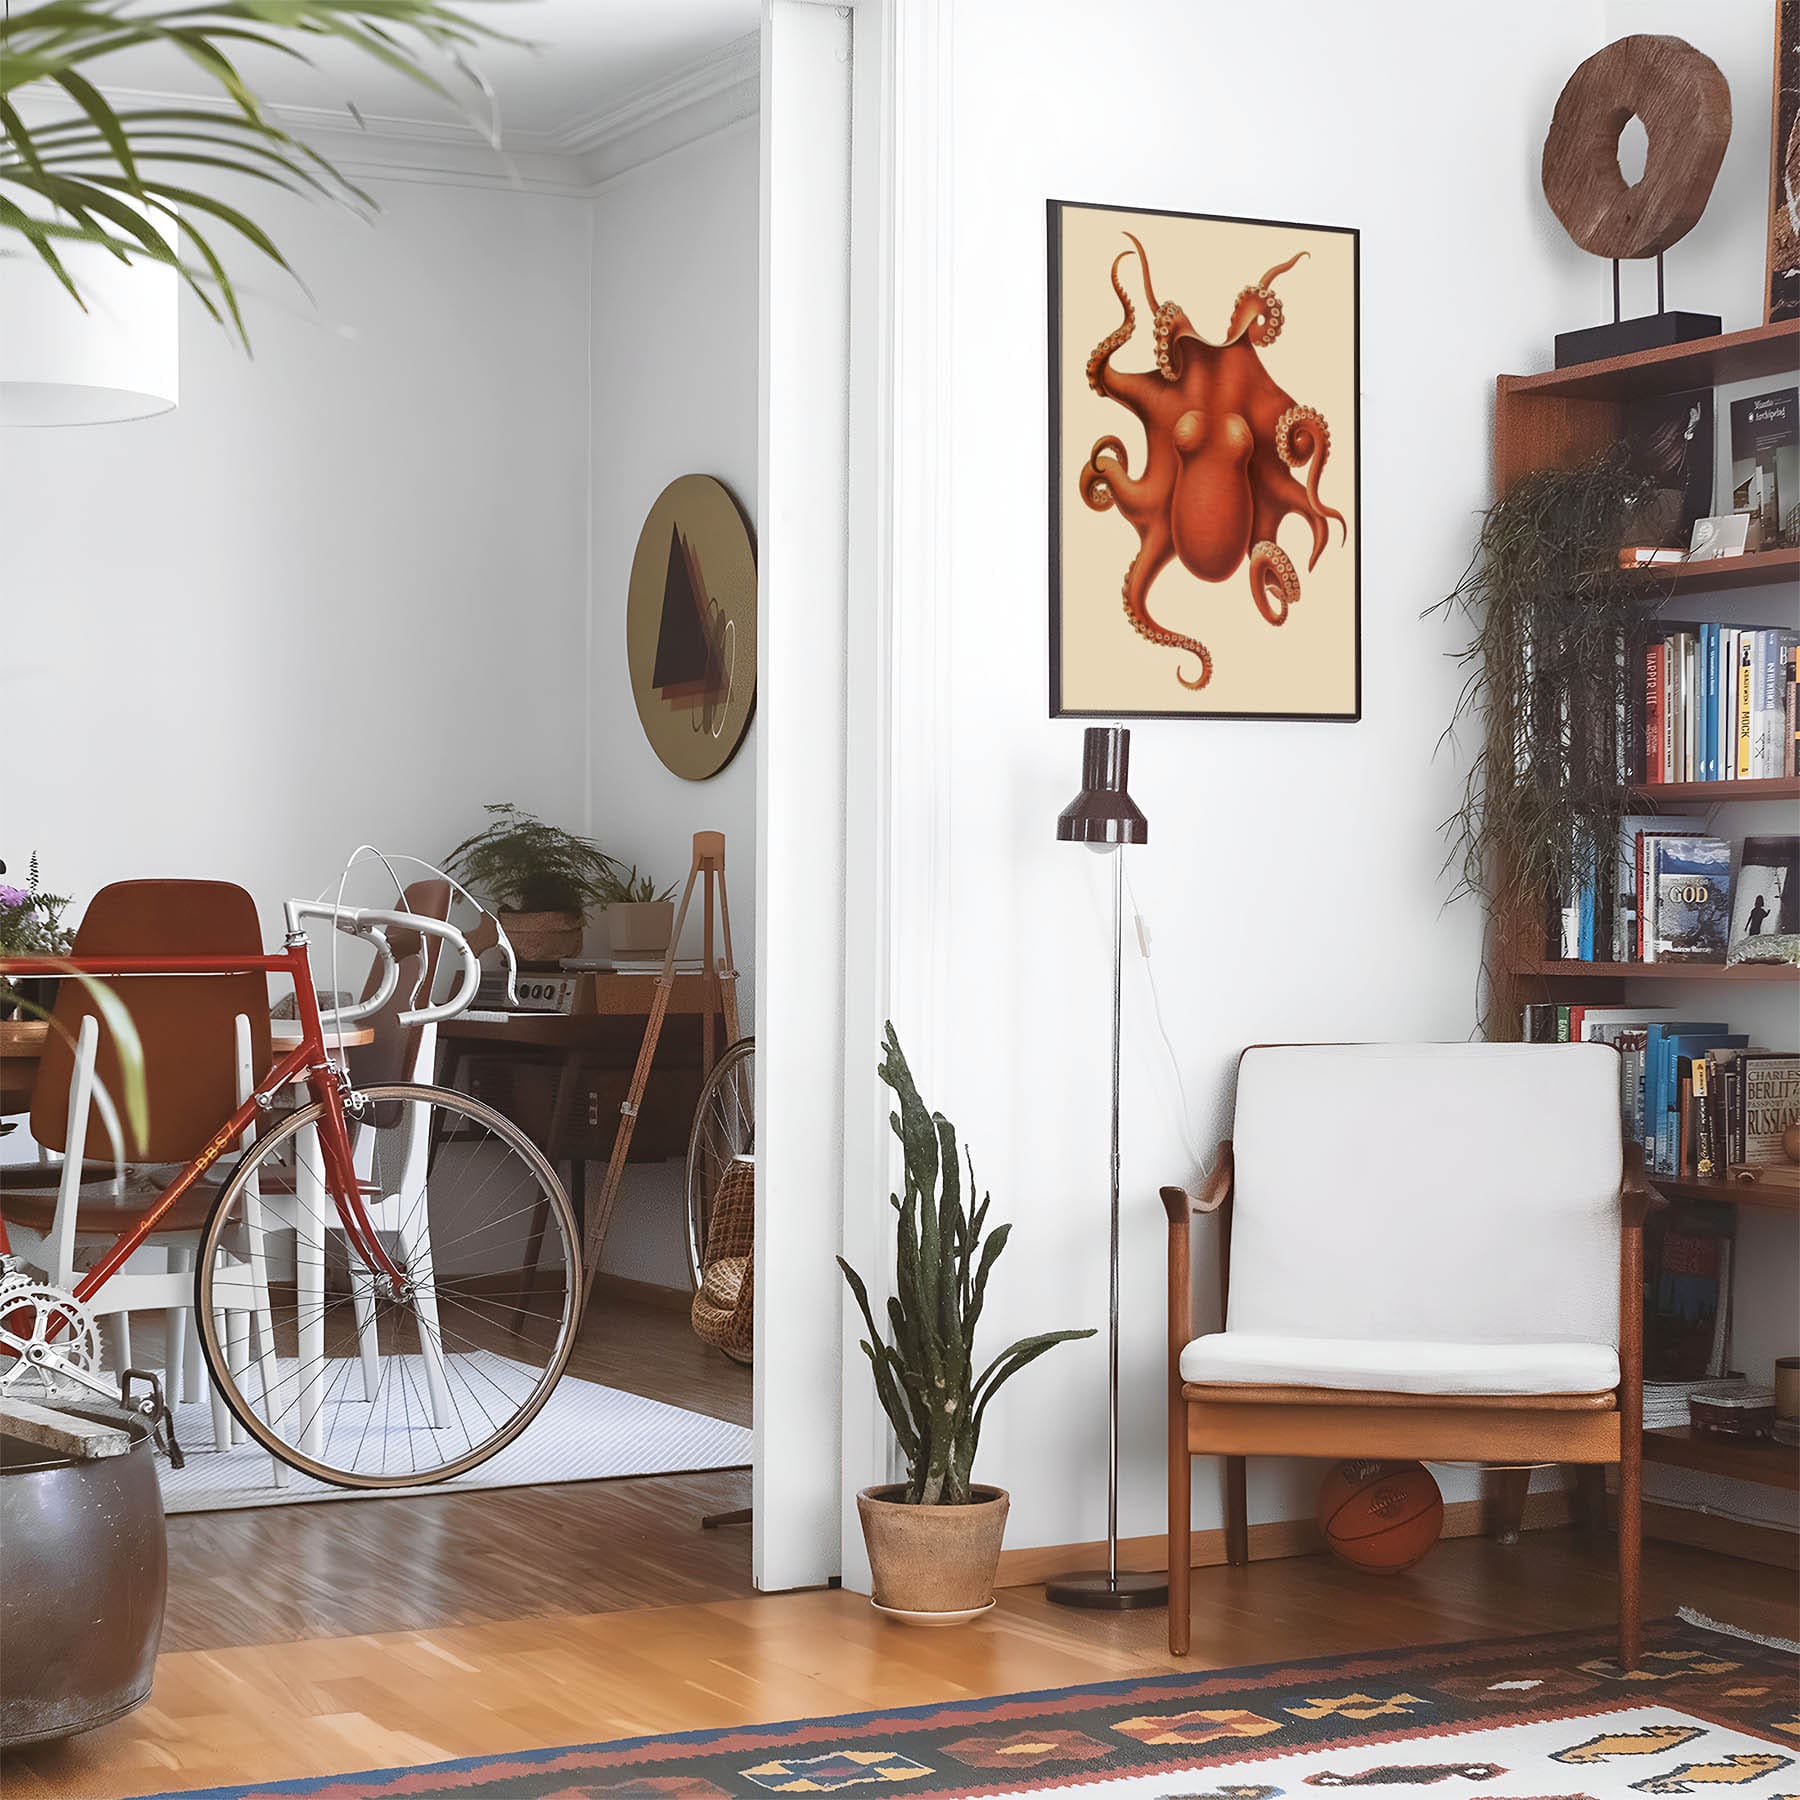 Eclectic living room with a road bike, bookshelf and house plants that features framed artwork of a Orange Red Octopus above a chair and lamp